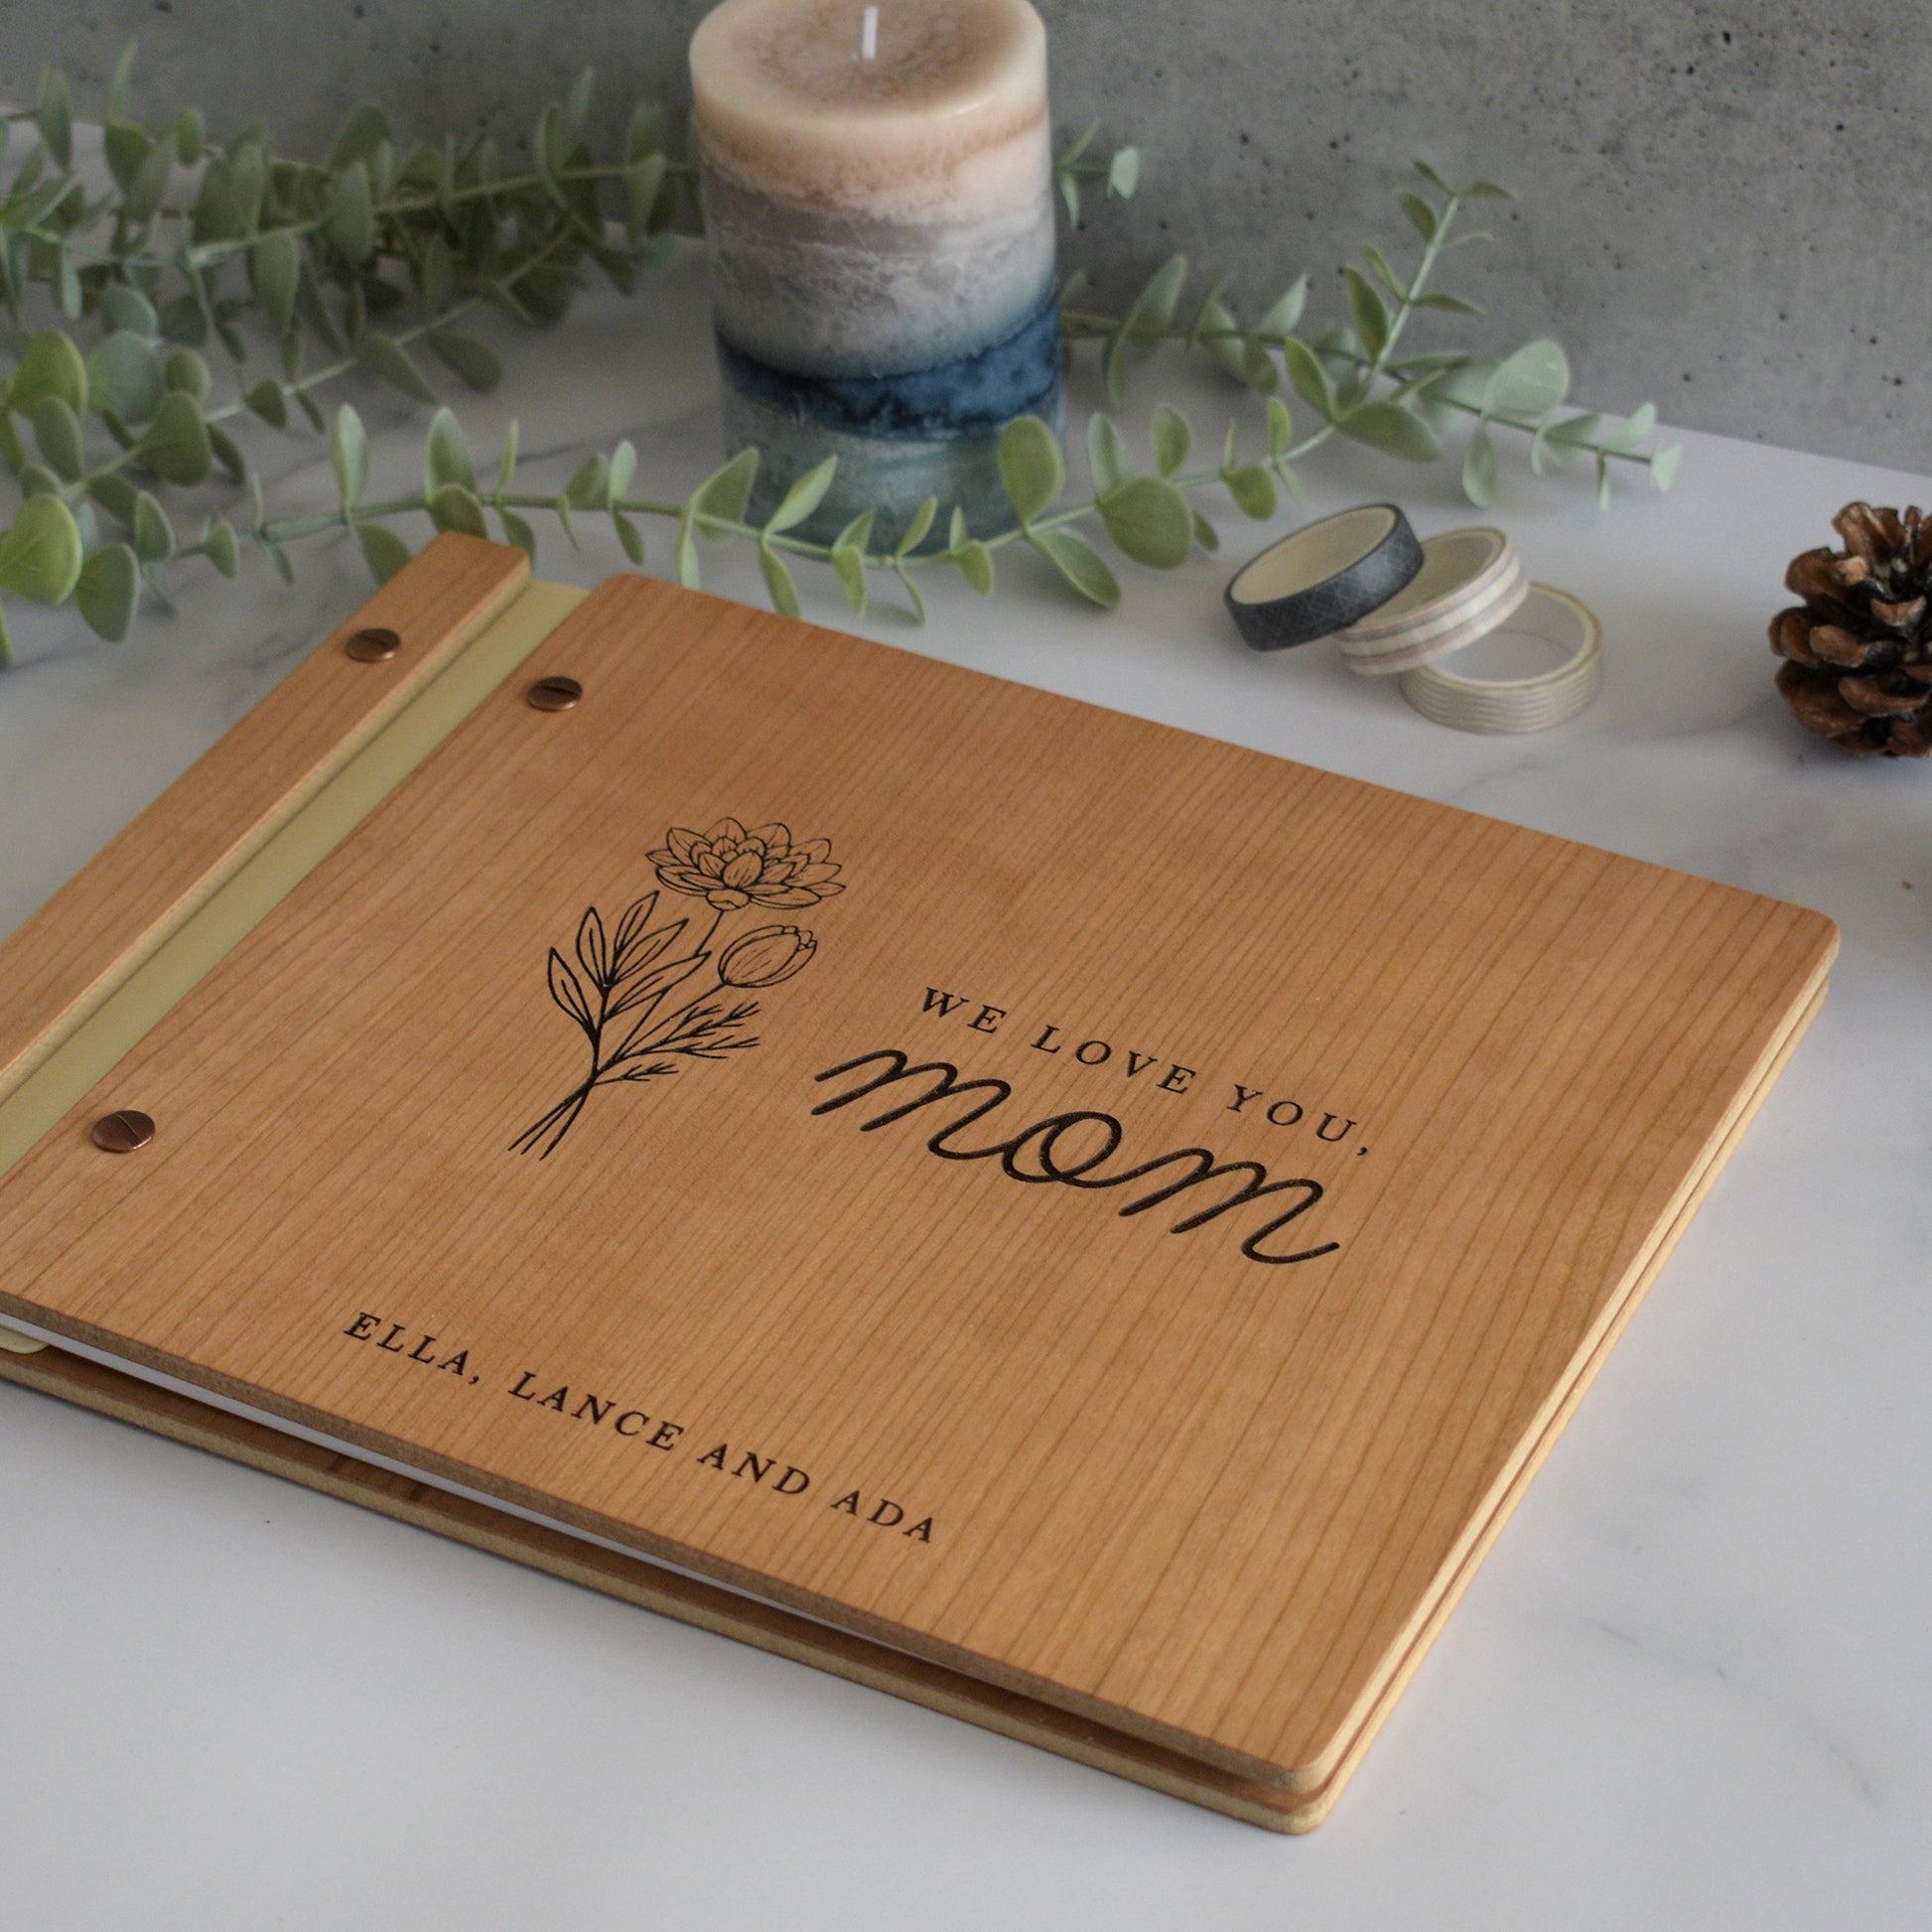 An 8.5x11" sized guest book lies on a table with greenery and a candle. This custom photo album includes a personalized engraving that reads We Love You, Mom with flowers.